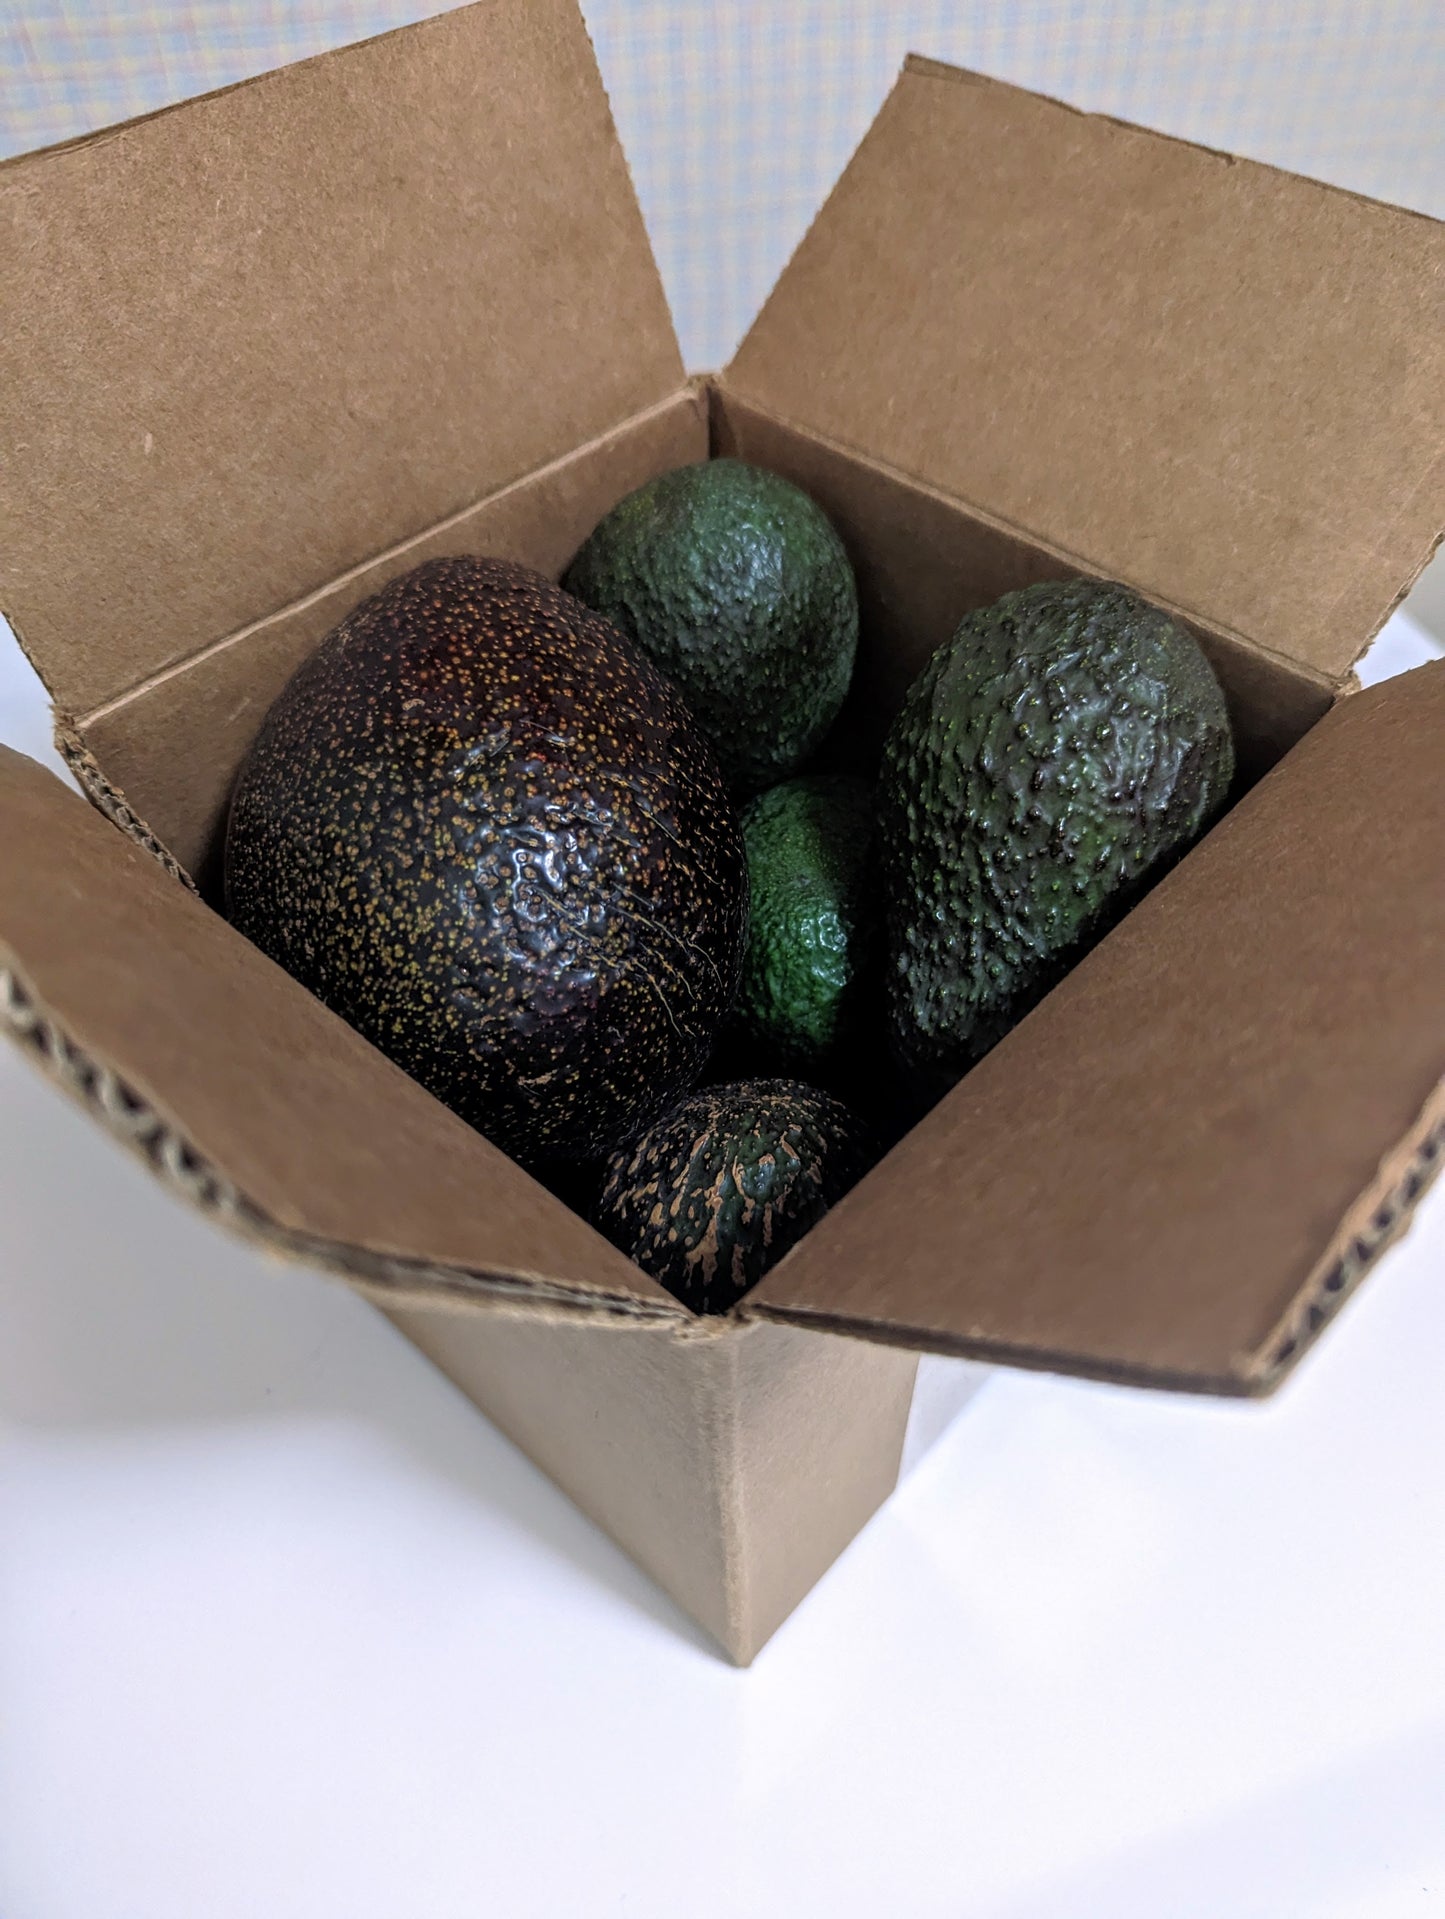 California Grown Avocados Delivered To Your Door - Certified Organic Hass Avocado Boxes